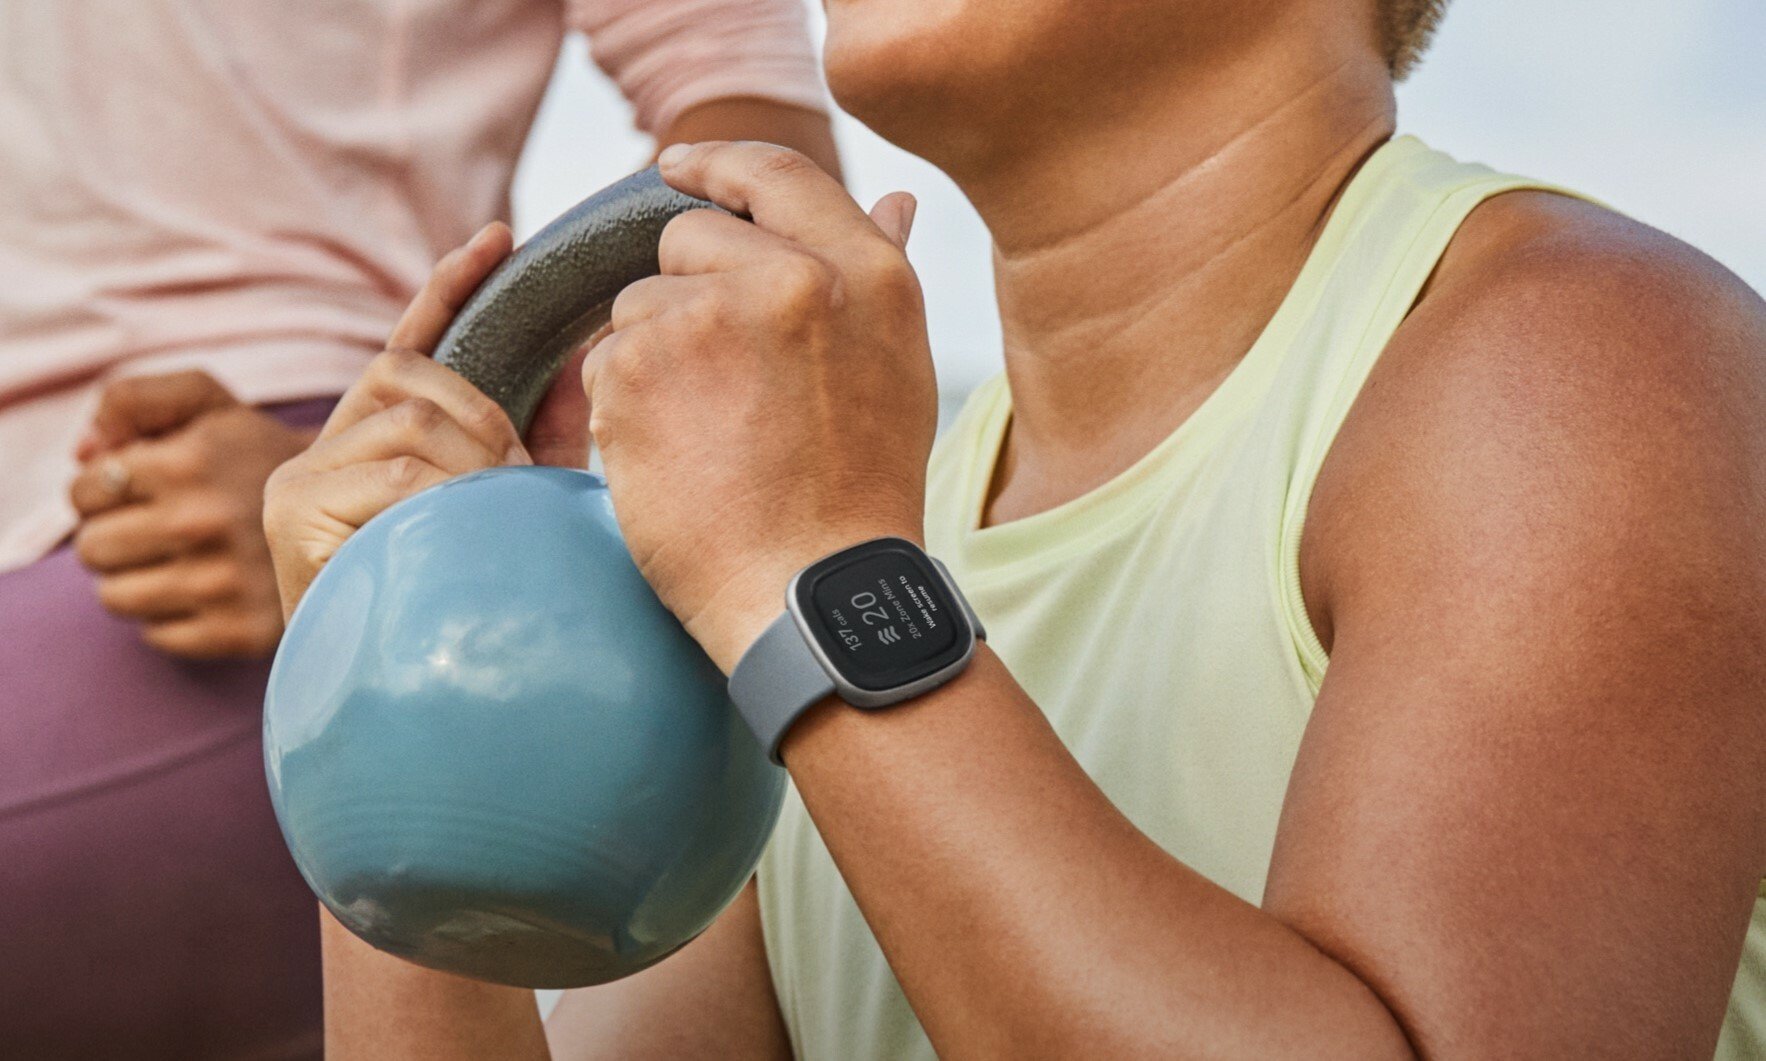 a person working out while holding a kettlebell is wearing a fitbit fitness tracker